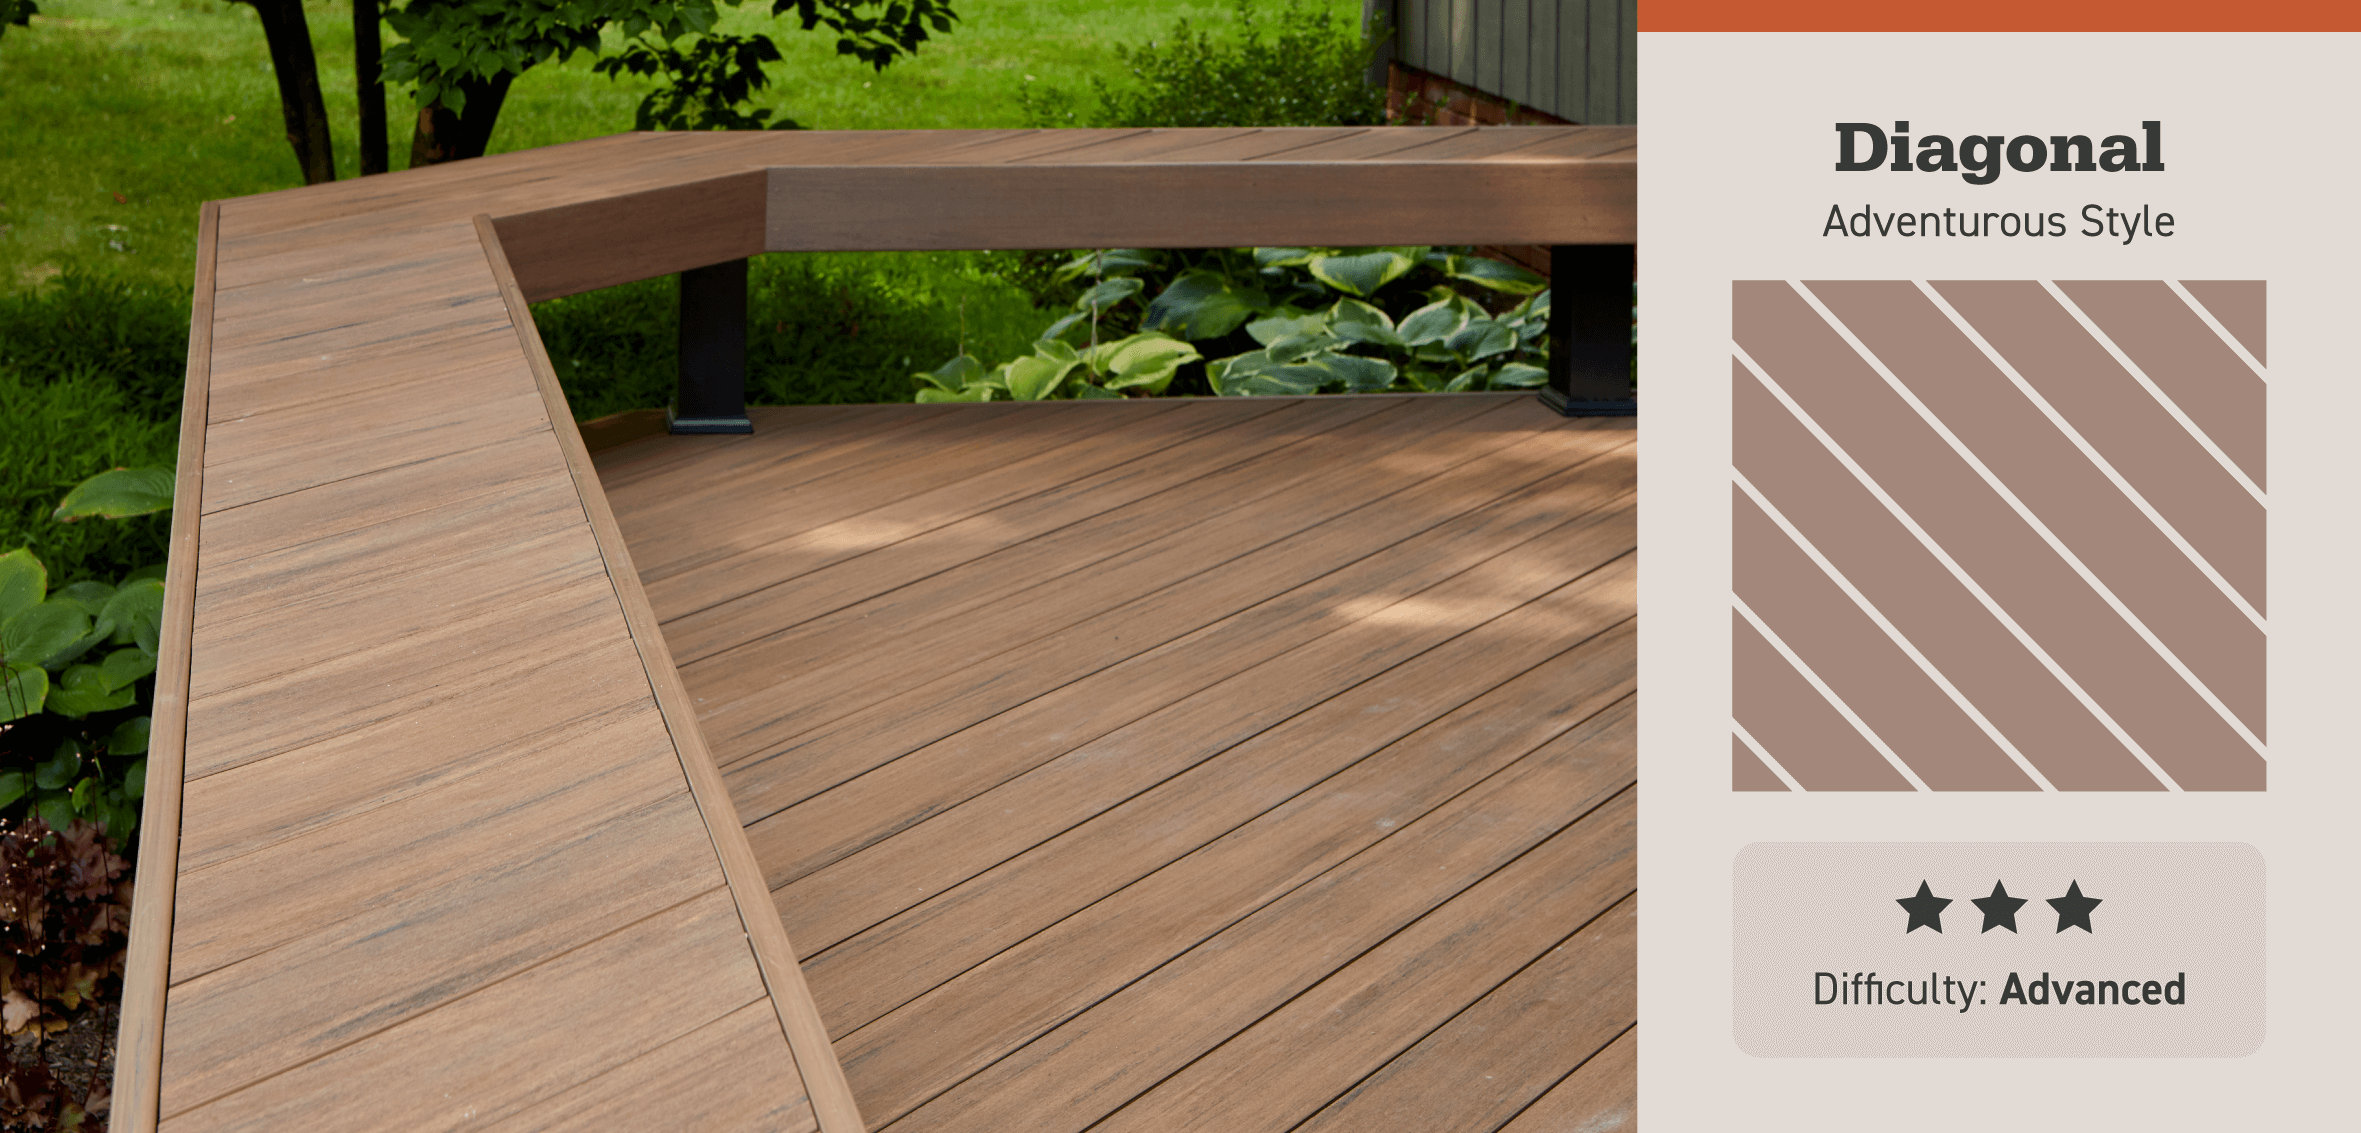 A photo shows diagonal decking with a pattern illustration and difficulty rating: advanced.